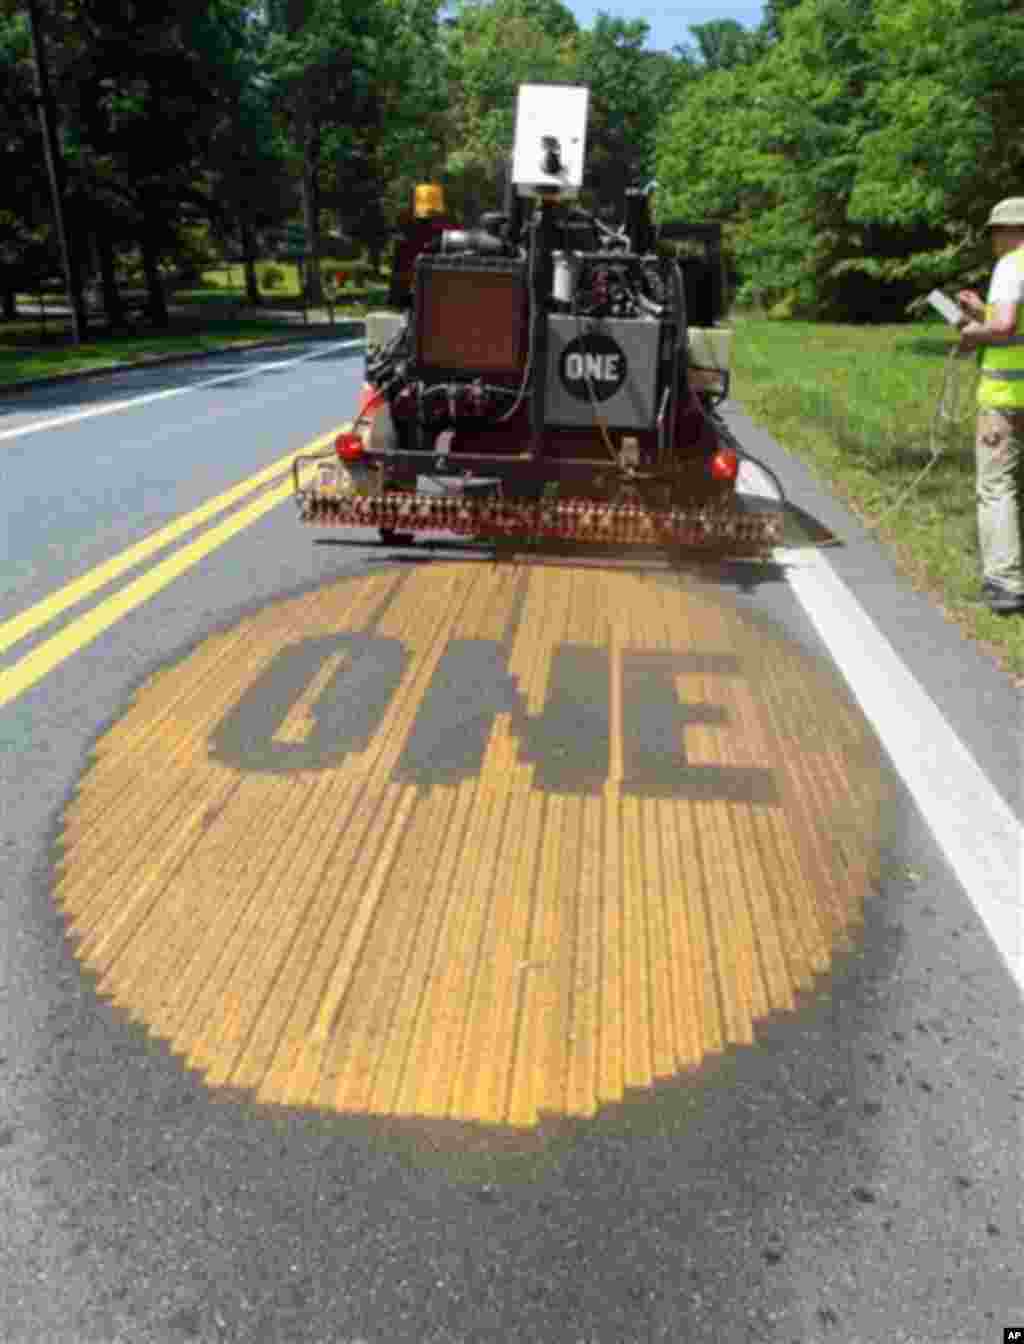 Greg Valtus, a member of the group ONE, uses a trailer mounted strayer to paint the groups logo onto Route 77 in Thurmont, Md. on Wednesday, May 16, 2012. The group, which raises awareness of worldwide poverty, used water soluble paint to spray hundreds o